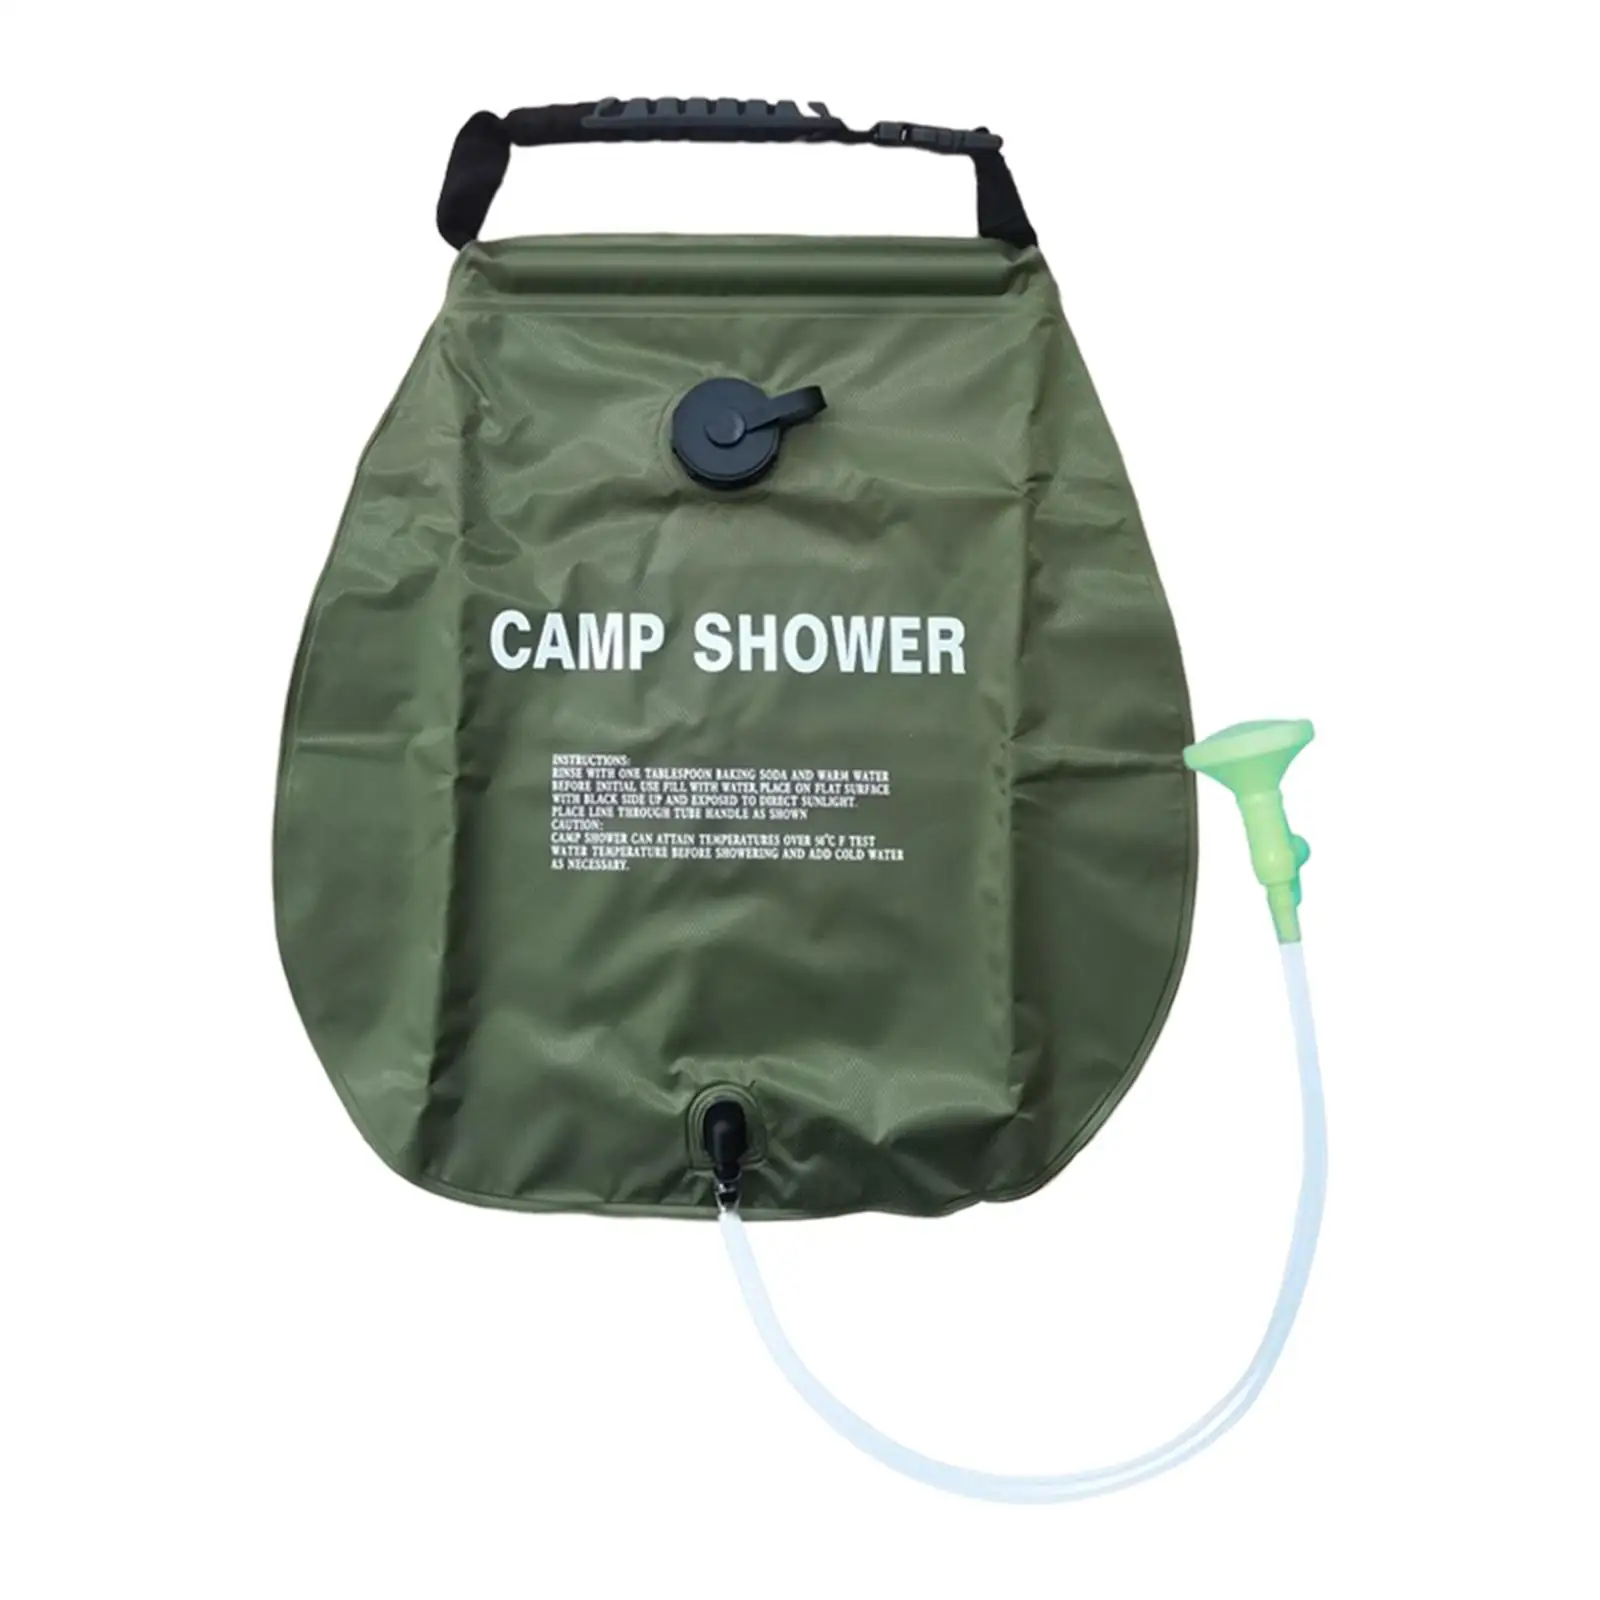 Solar Shower Bag with Patch Temperature with Removable Hose with Mesh Pocket Camping Shower Bag for Traveling